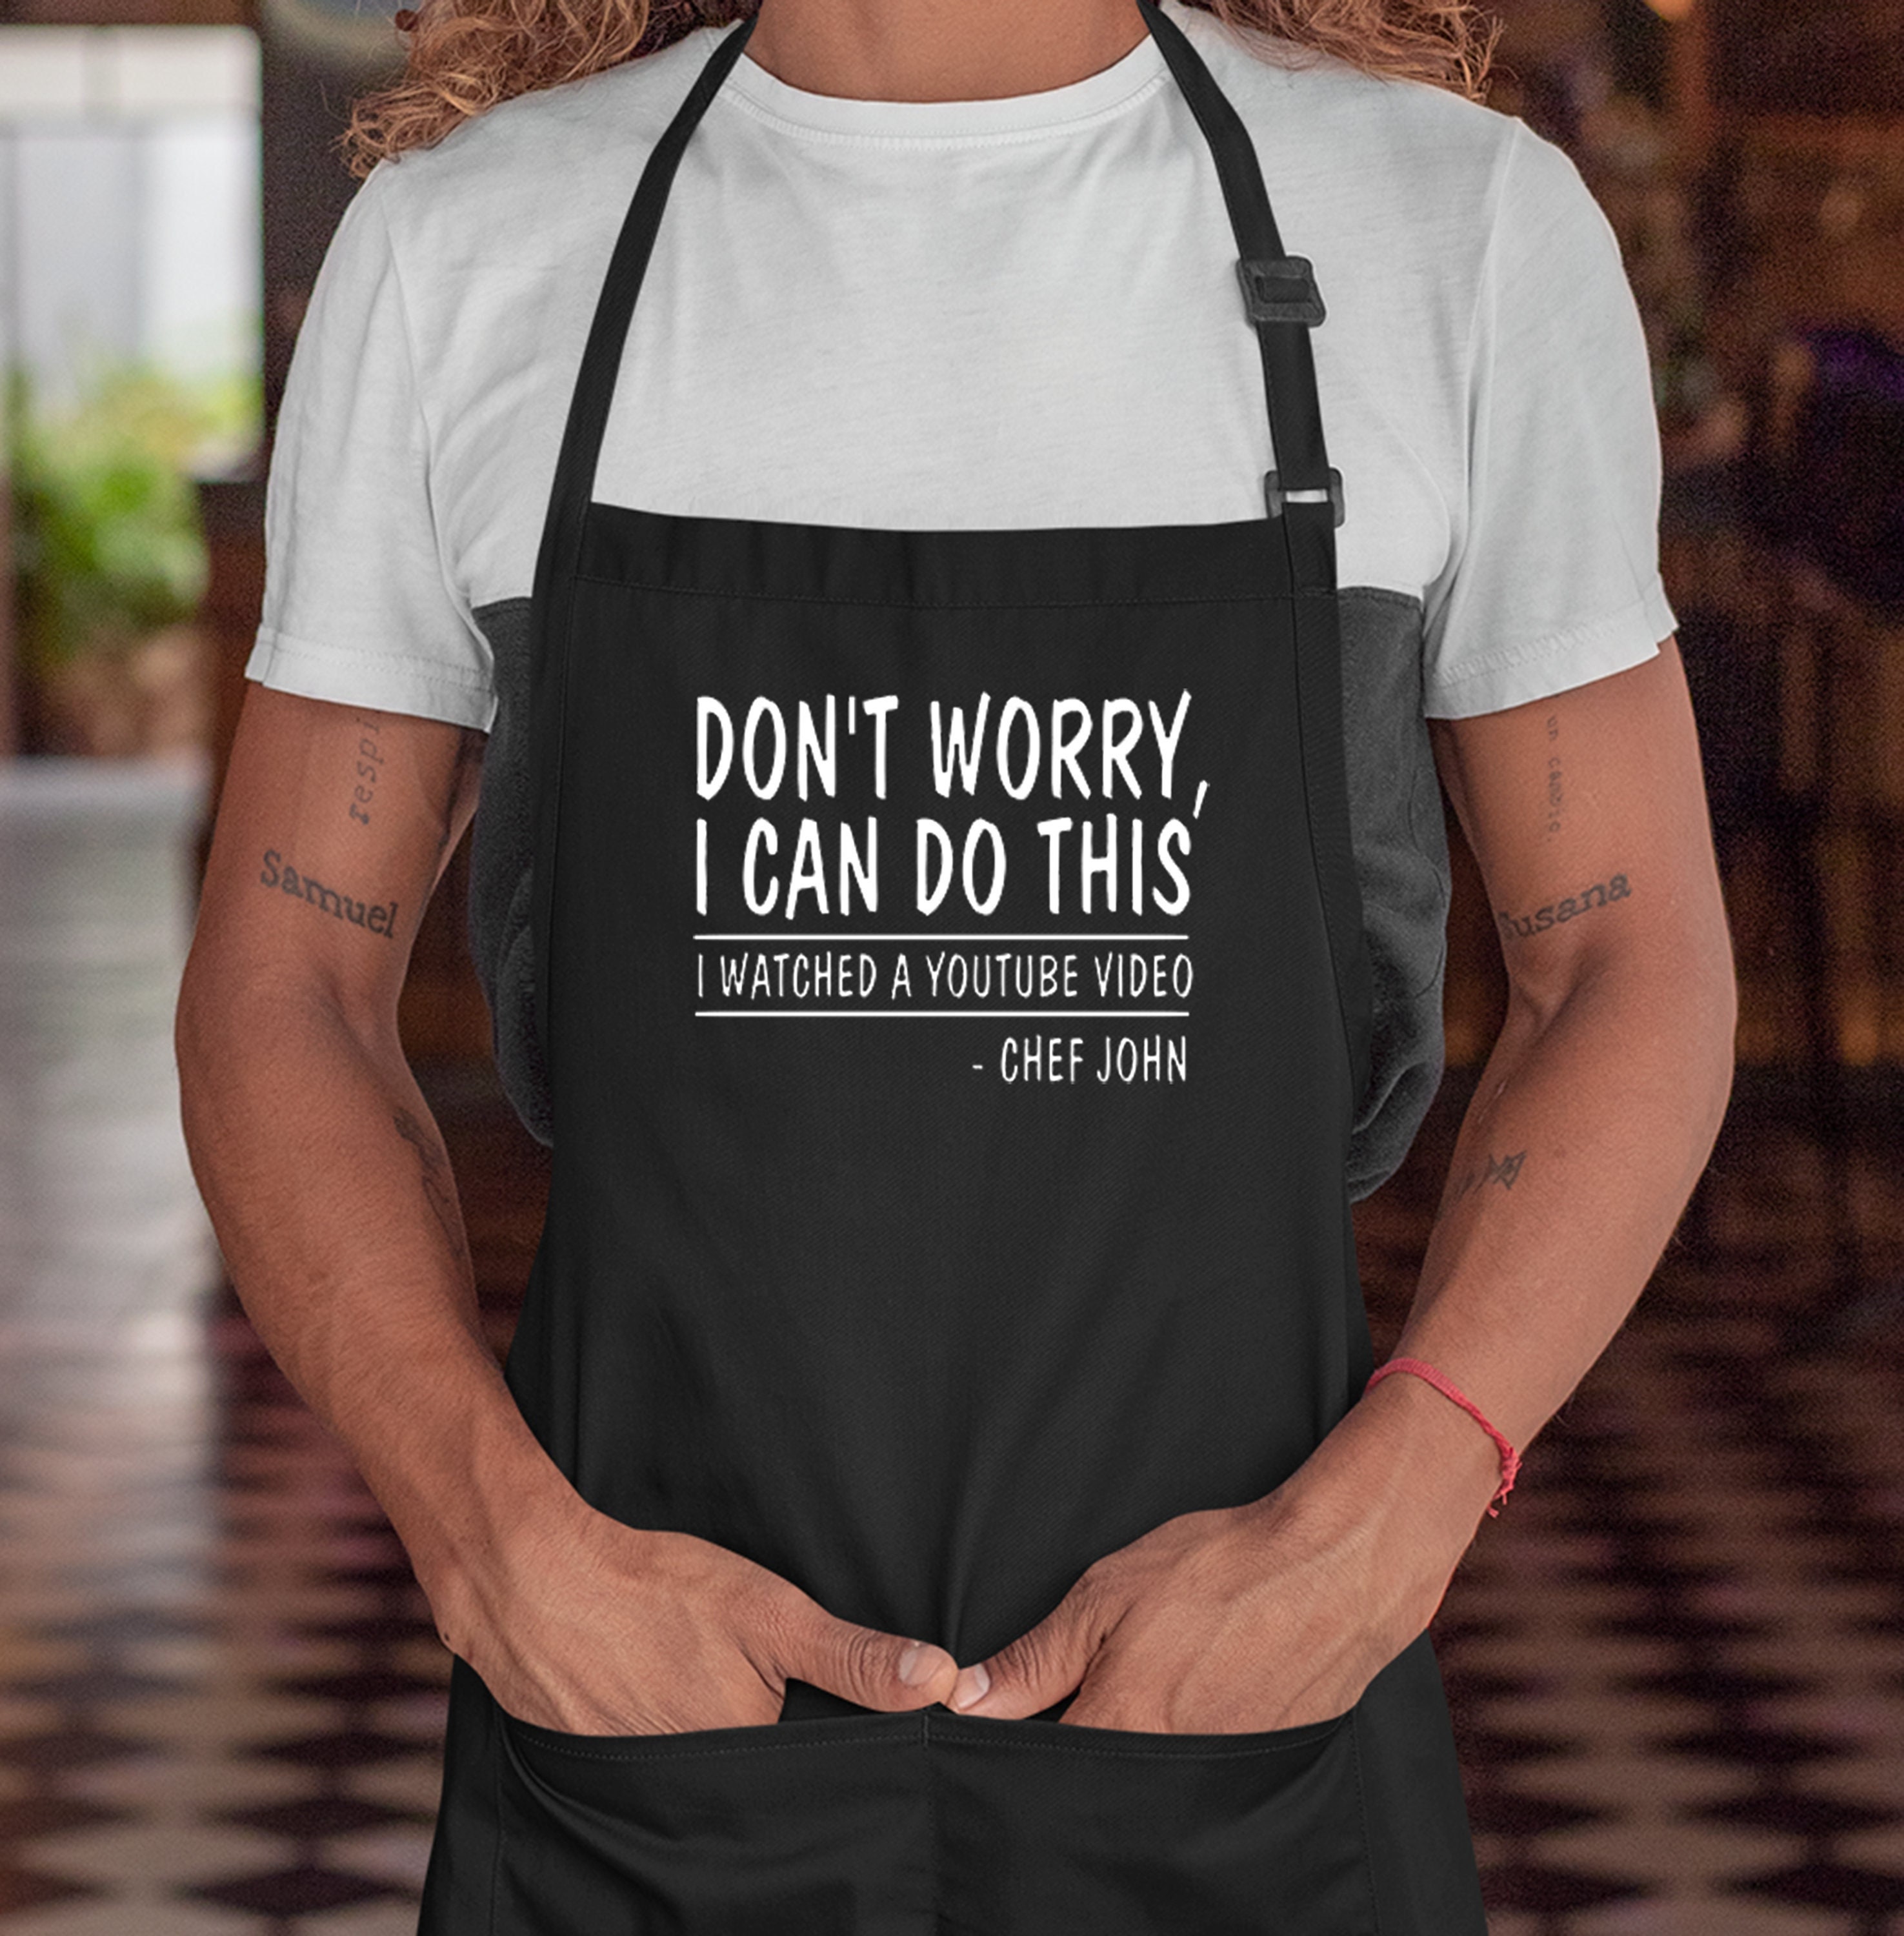 Today's Menu Take It or Leave It Funny Chef Cooking Graphic Kitchen Accessories (Oven Mitt + Apron)